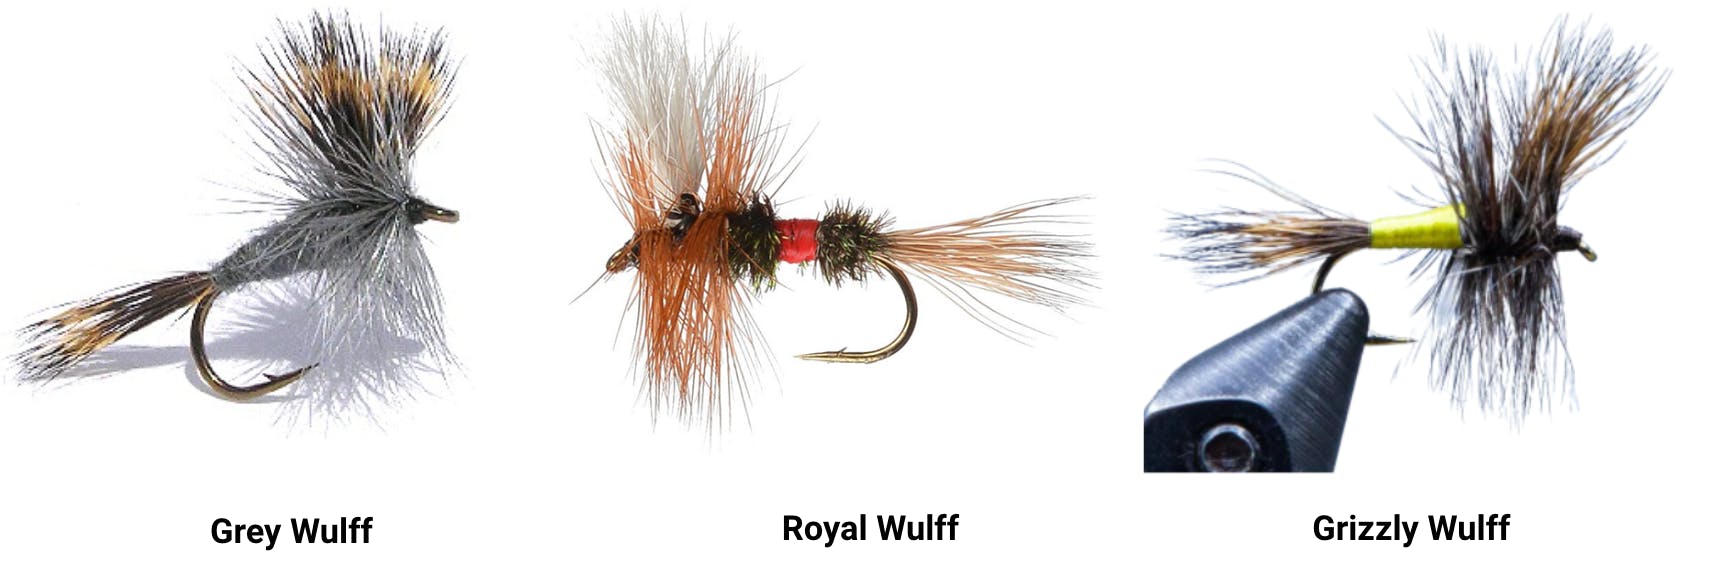 Three flies for fly fishing. On the left is the Grey Wulff, in the middle is the Royal Wulff, and on the right is the Grizzly Wulff.